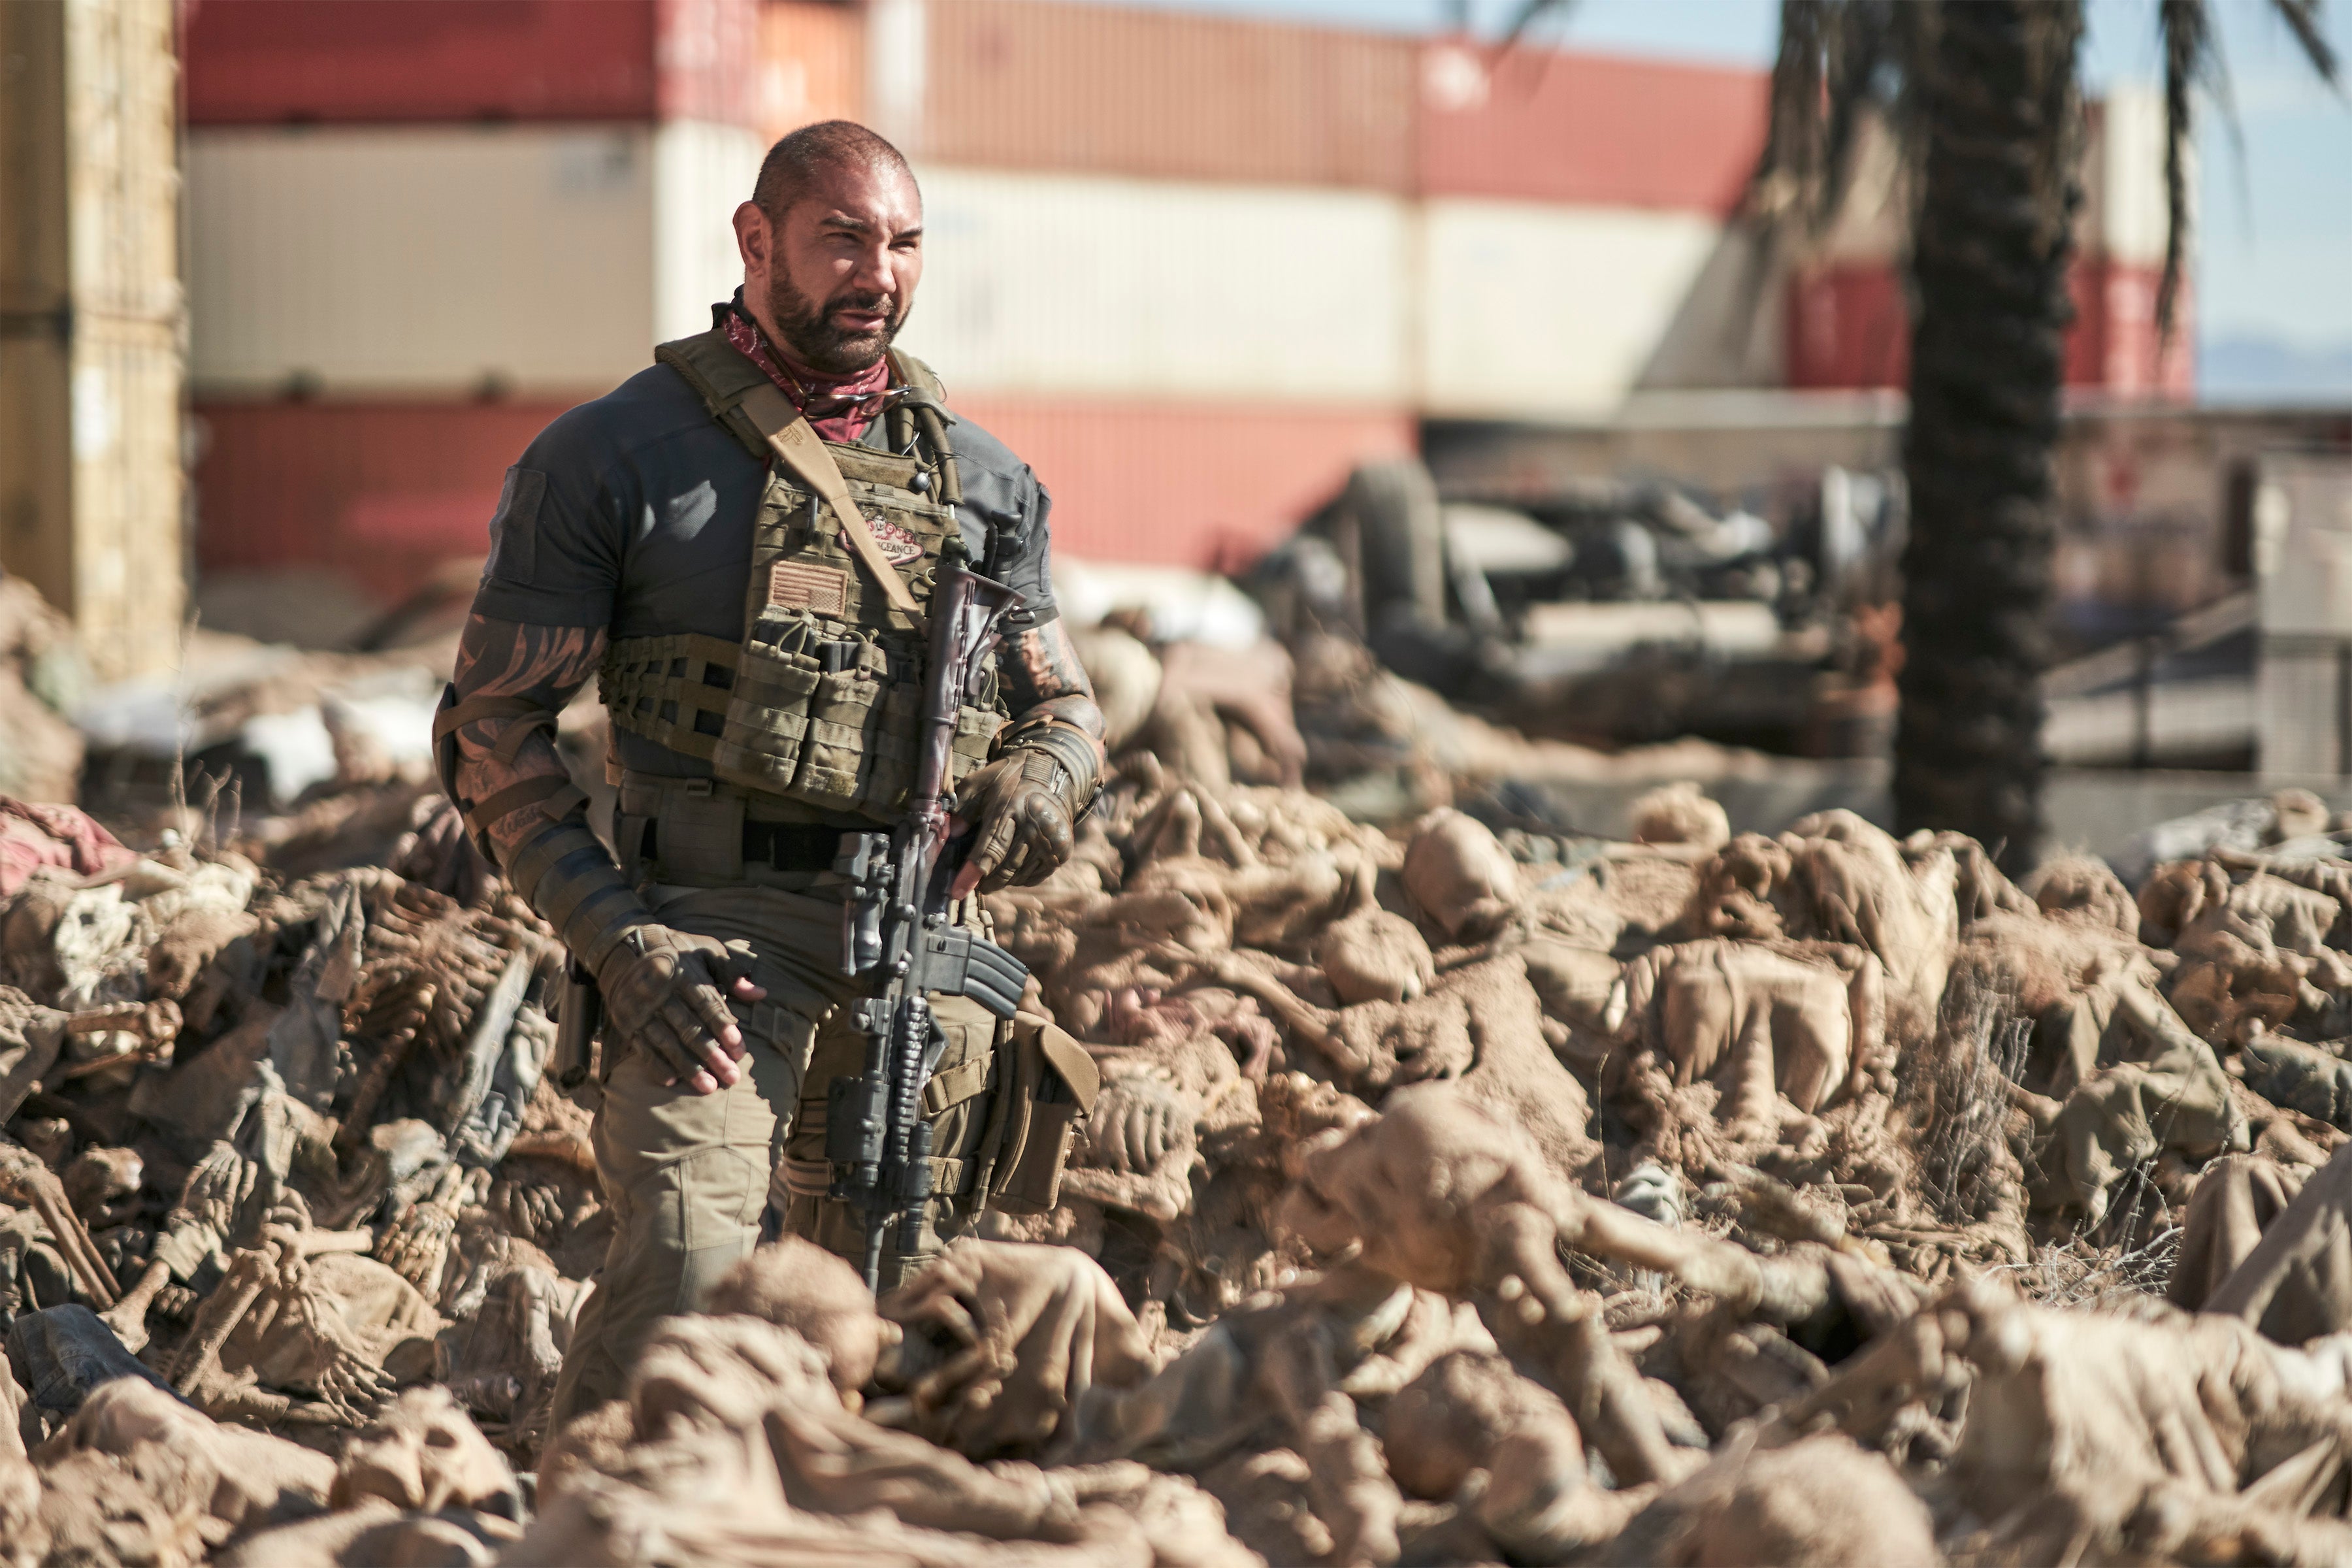 Scott Ward (Dave Bautista) saved the secretary of defence and received the presidential medal of freedom, but still spends his days flipping burgers